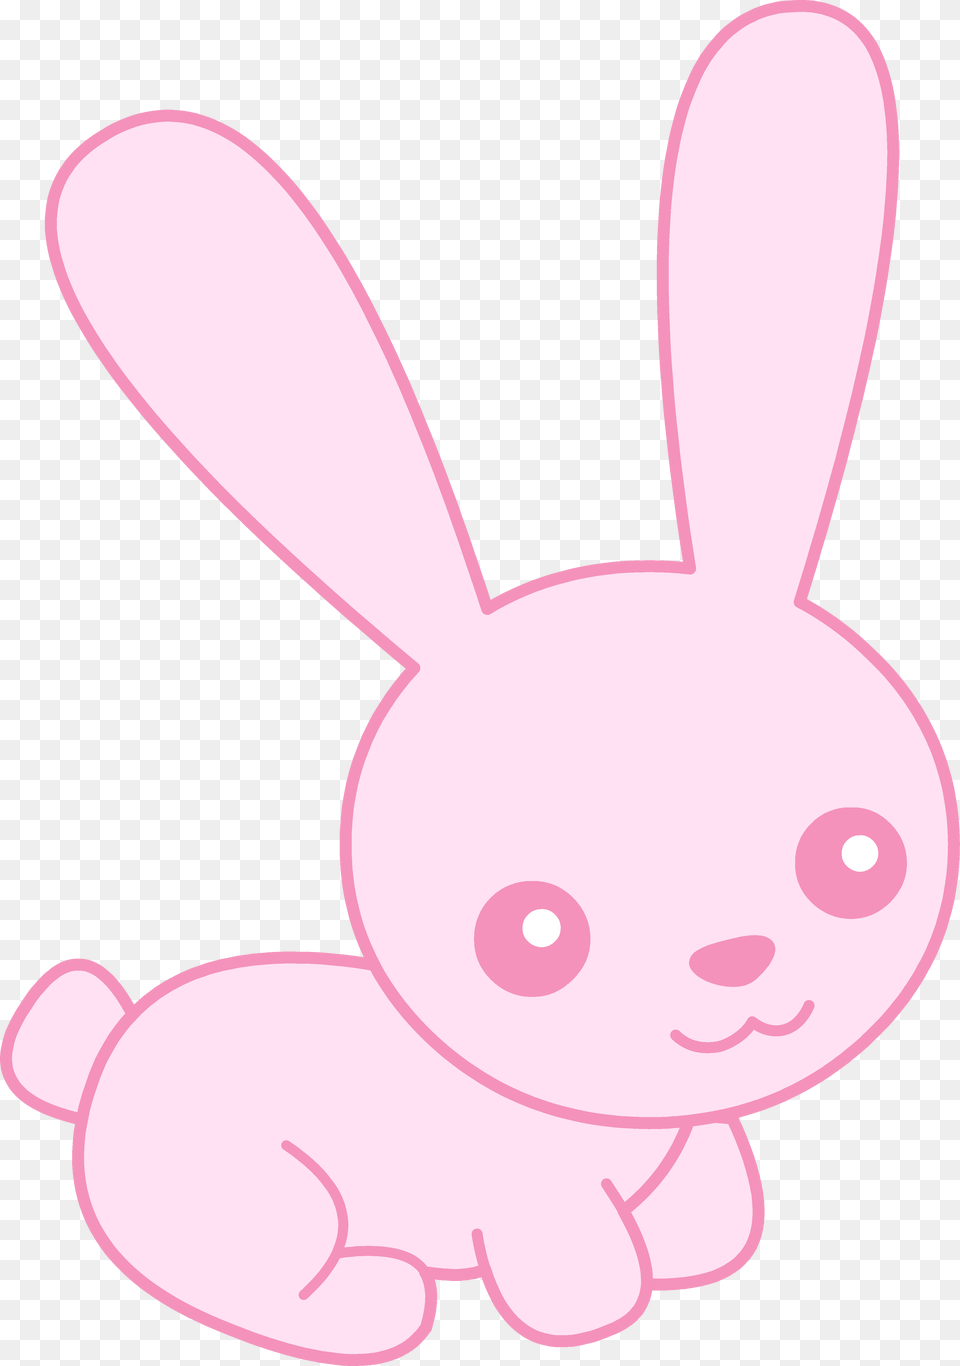 Bunny Head Clip Art, Smoke Pipe, Toy Png